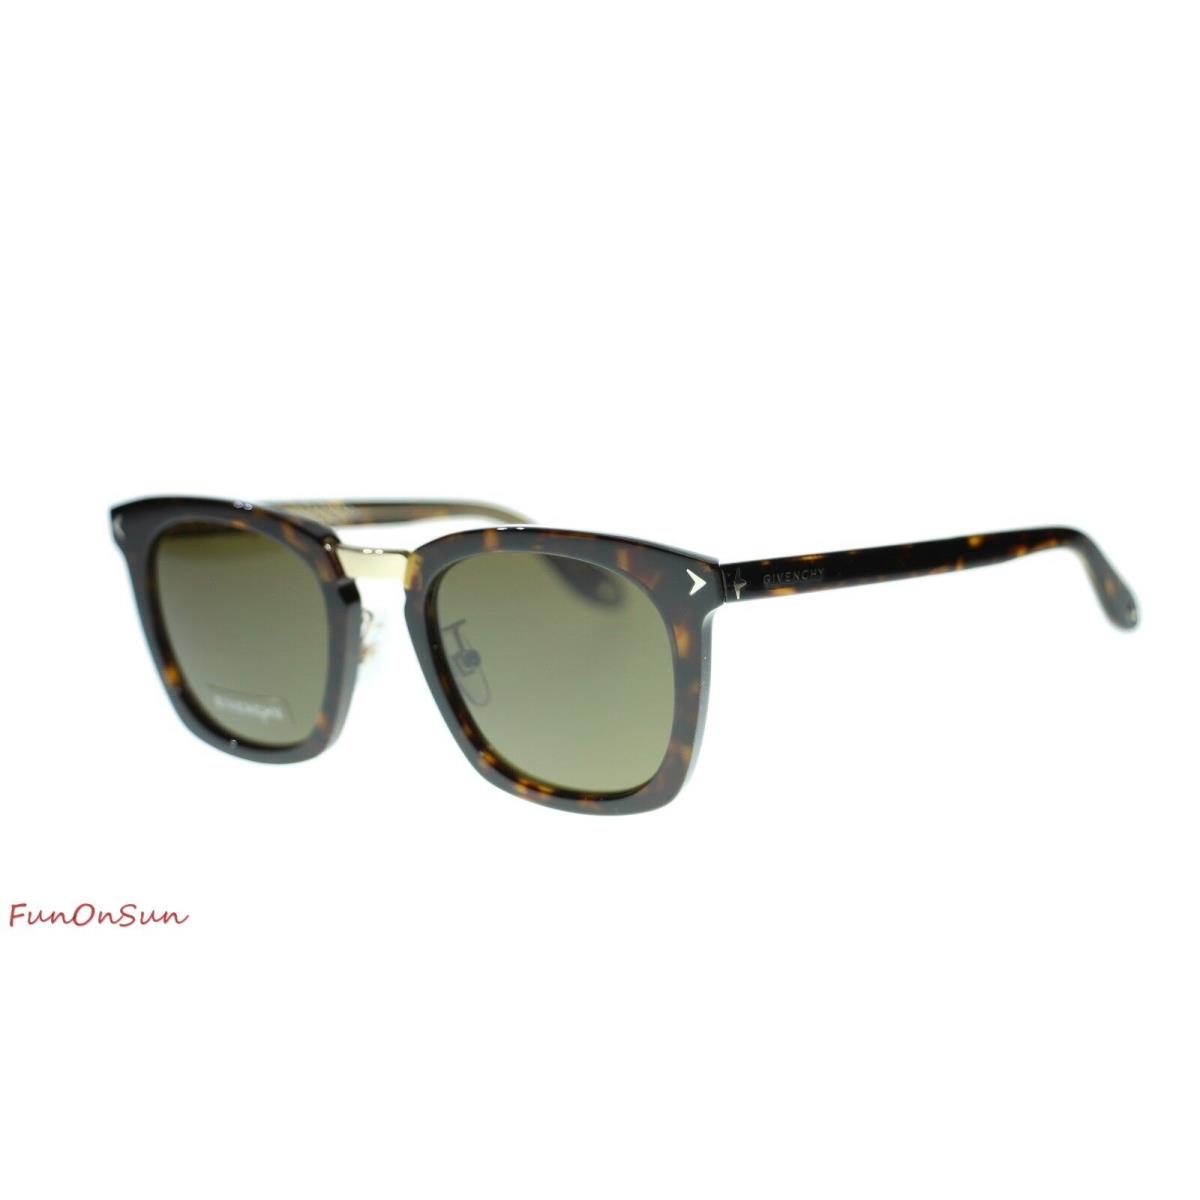 Givenchy Women`s Sunglasses GV7065 WR9 Havana Brown/brown Lens Square